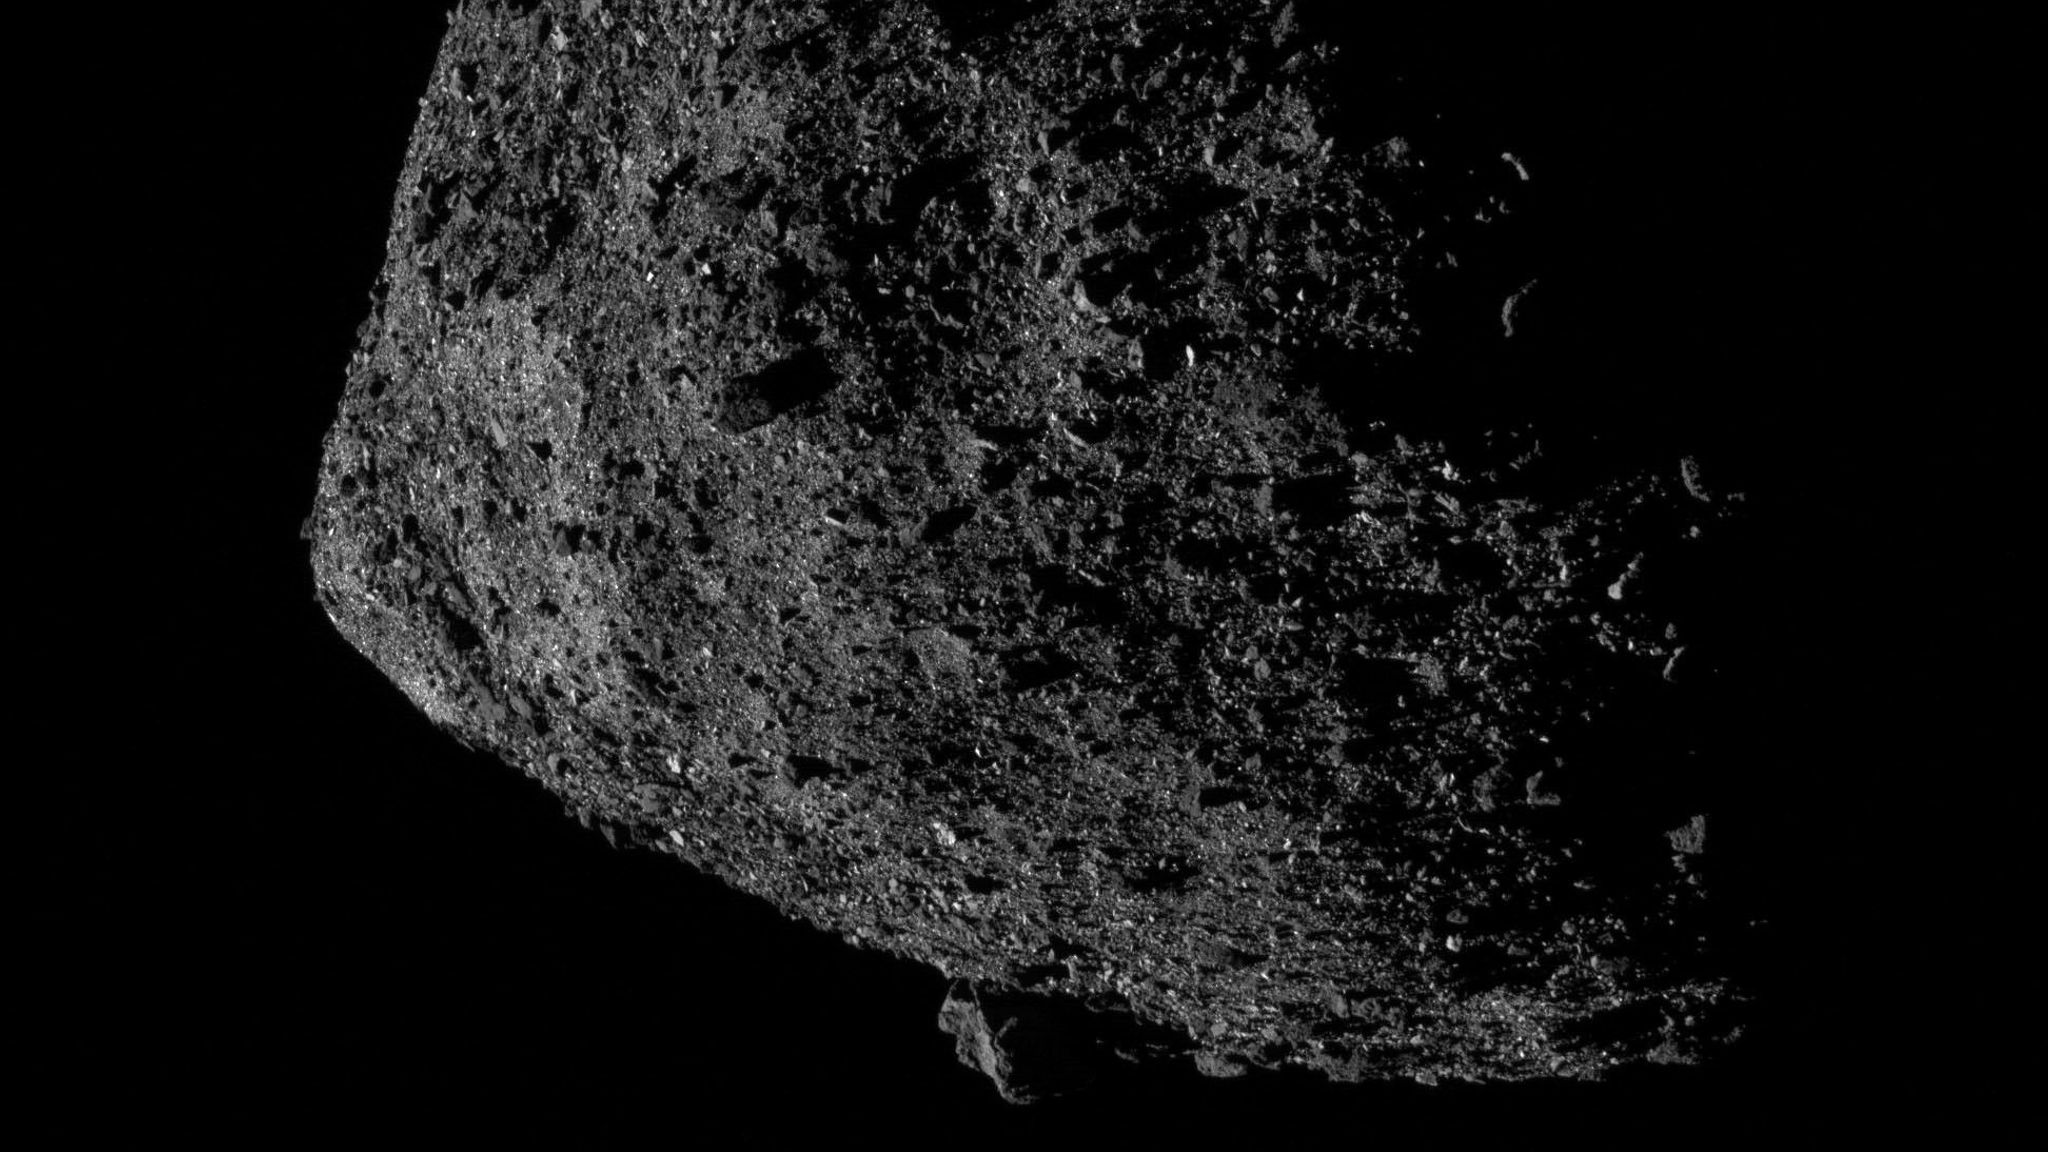 NASA captures closest-ever photo of massive asteroid Bennu flying near Earth | World News | Sky News